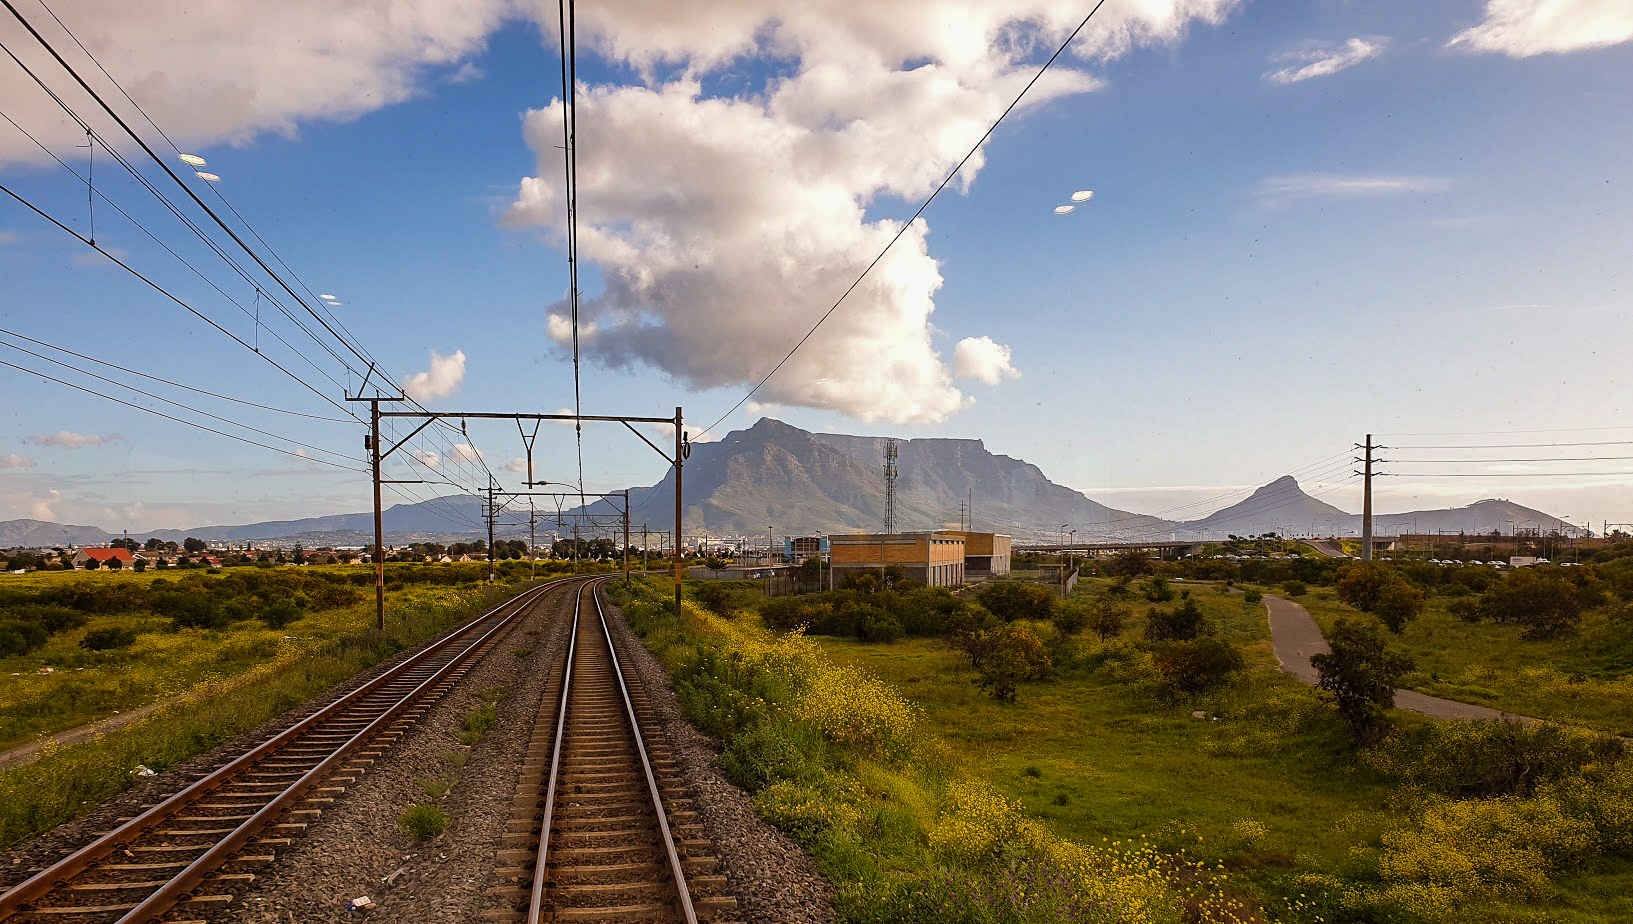 Table mountain viewed from the observation car of The Blue Train